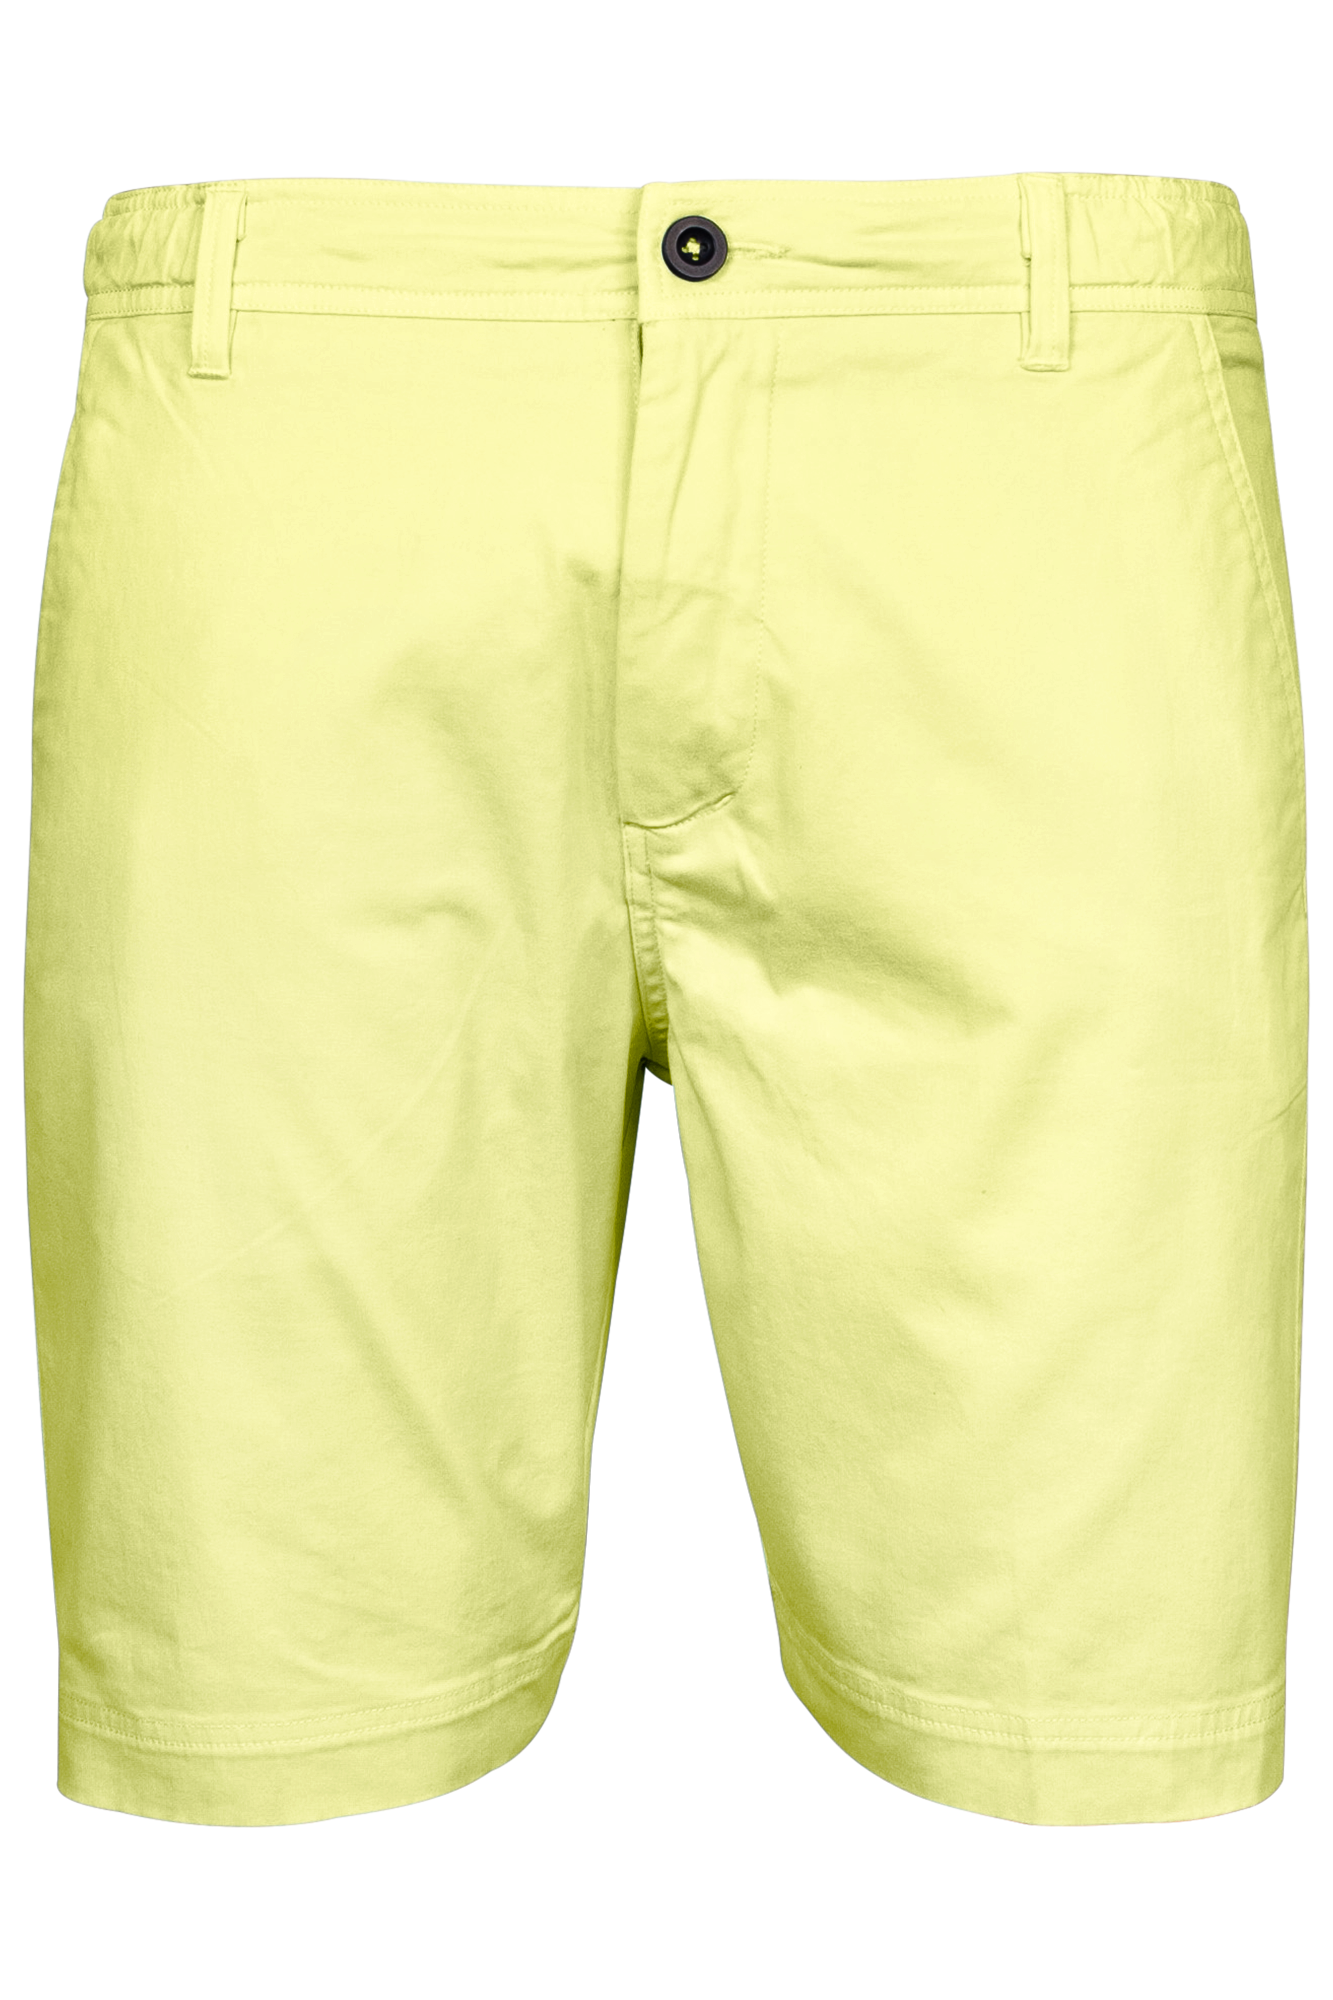 Porter shorts in lime by Giordano